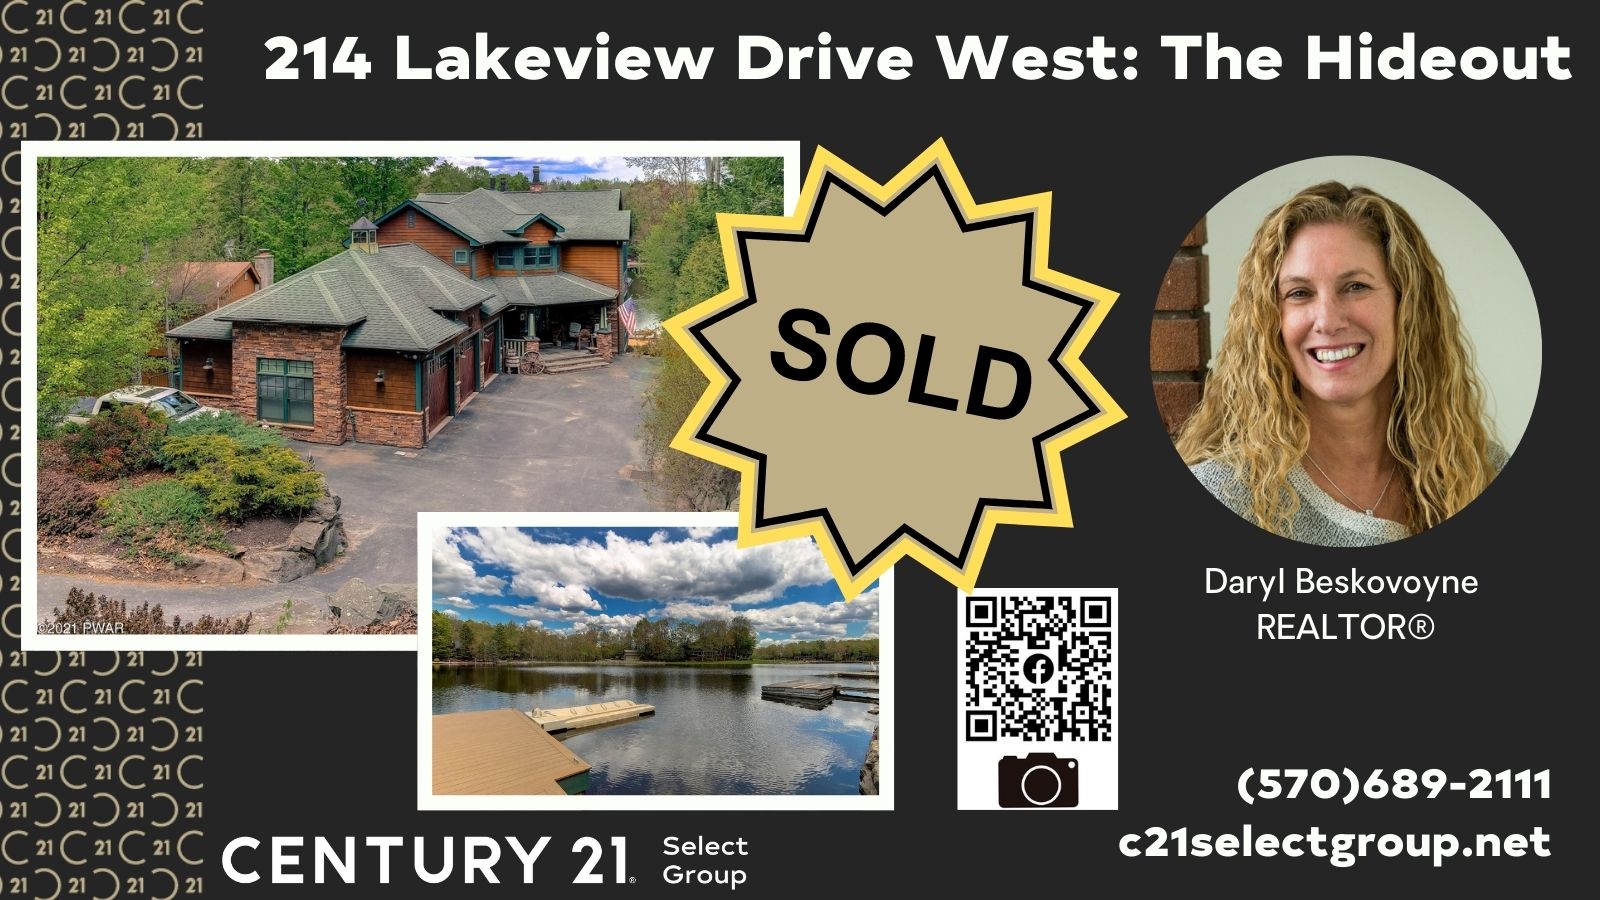 SOLD! 214 Lakeview Drive West: The Hideout